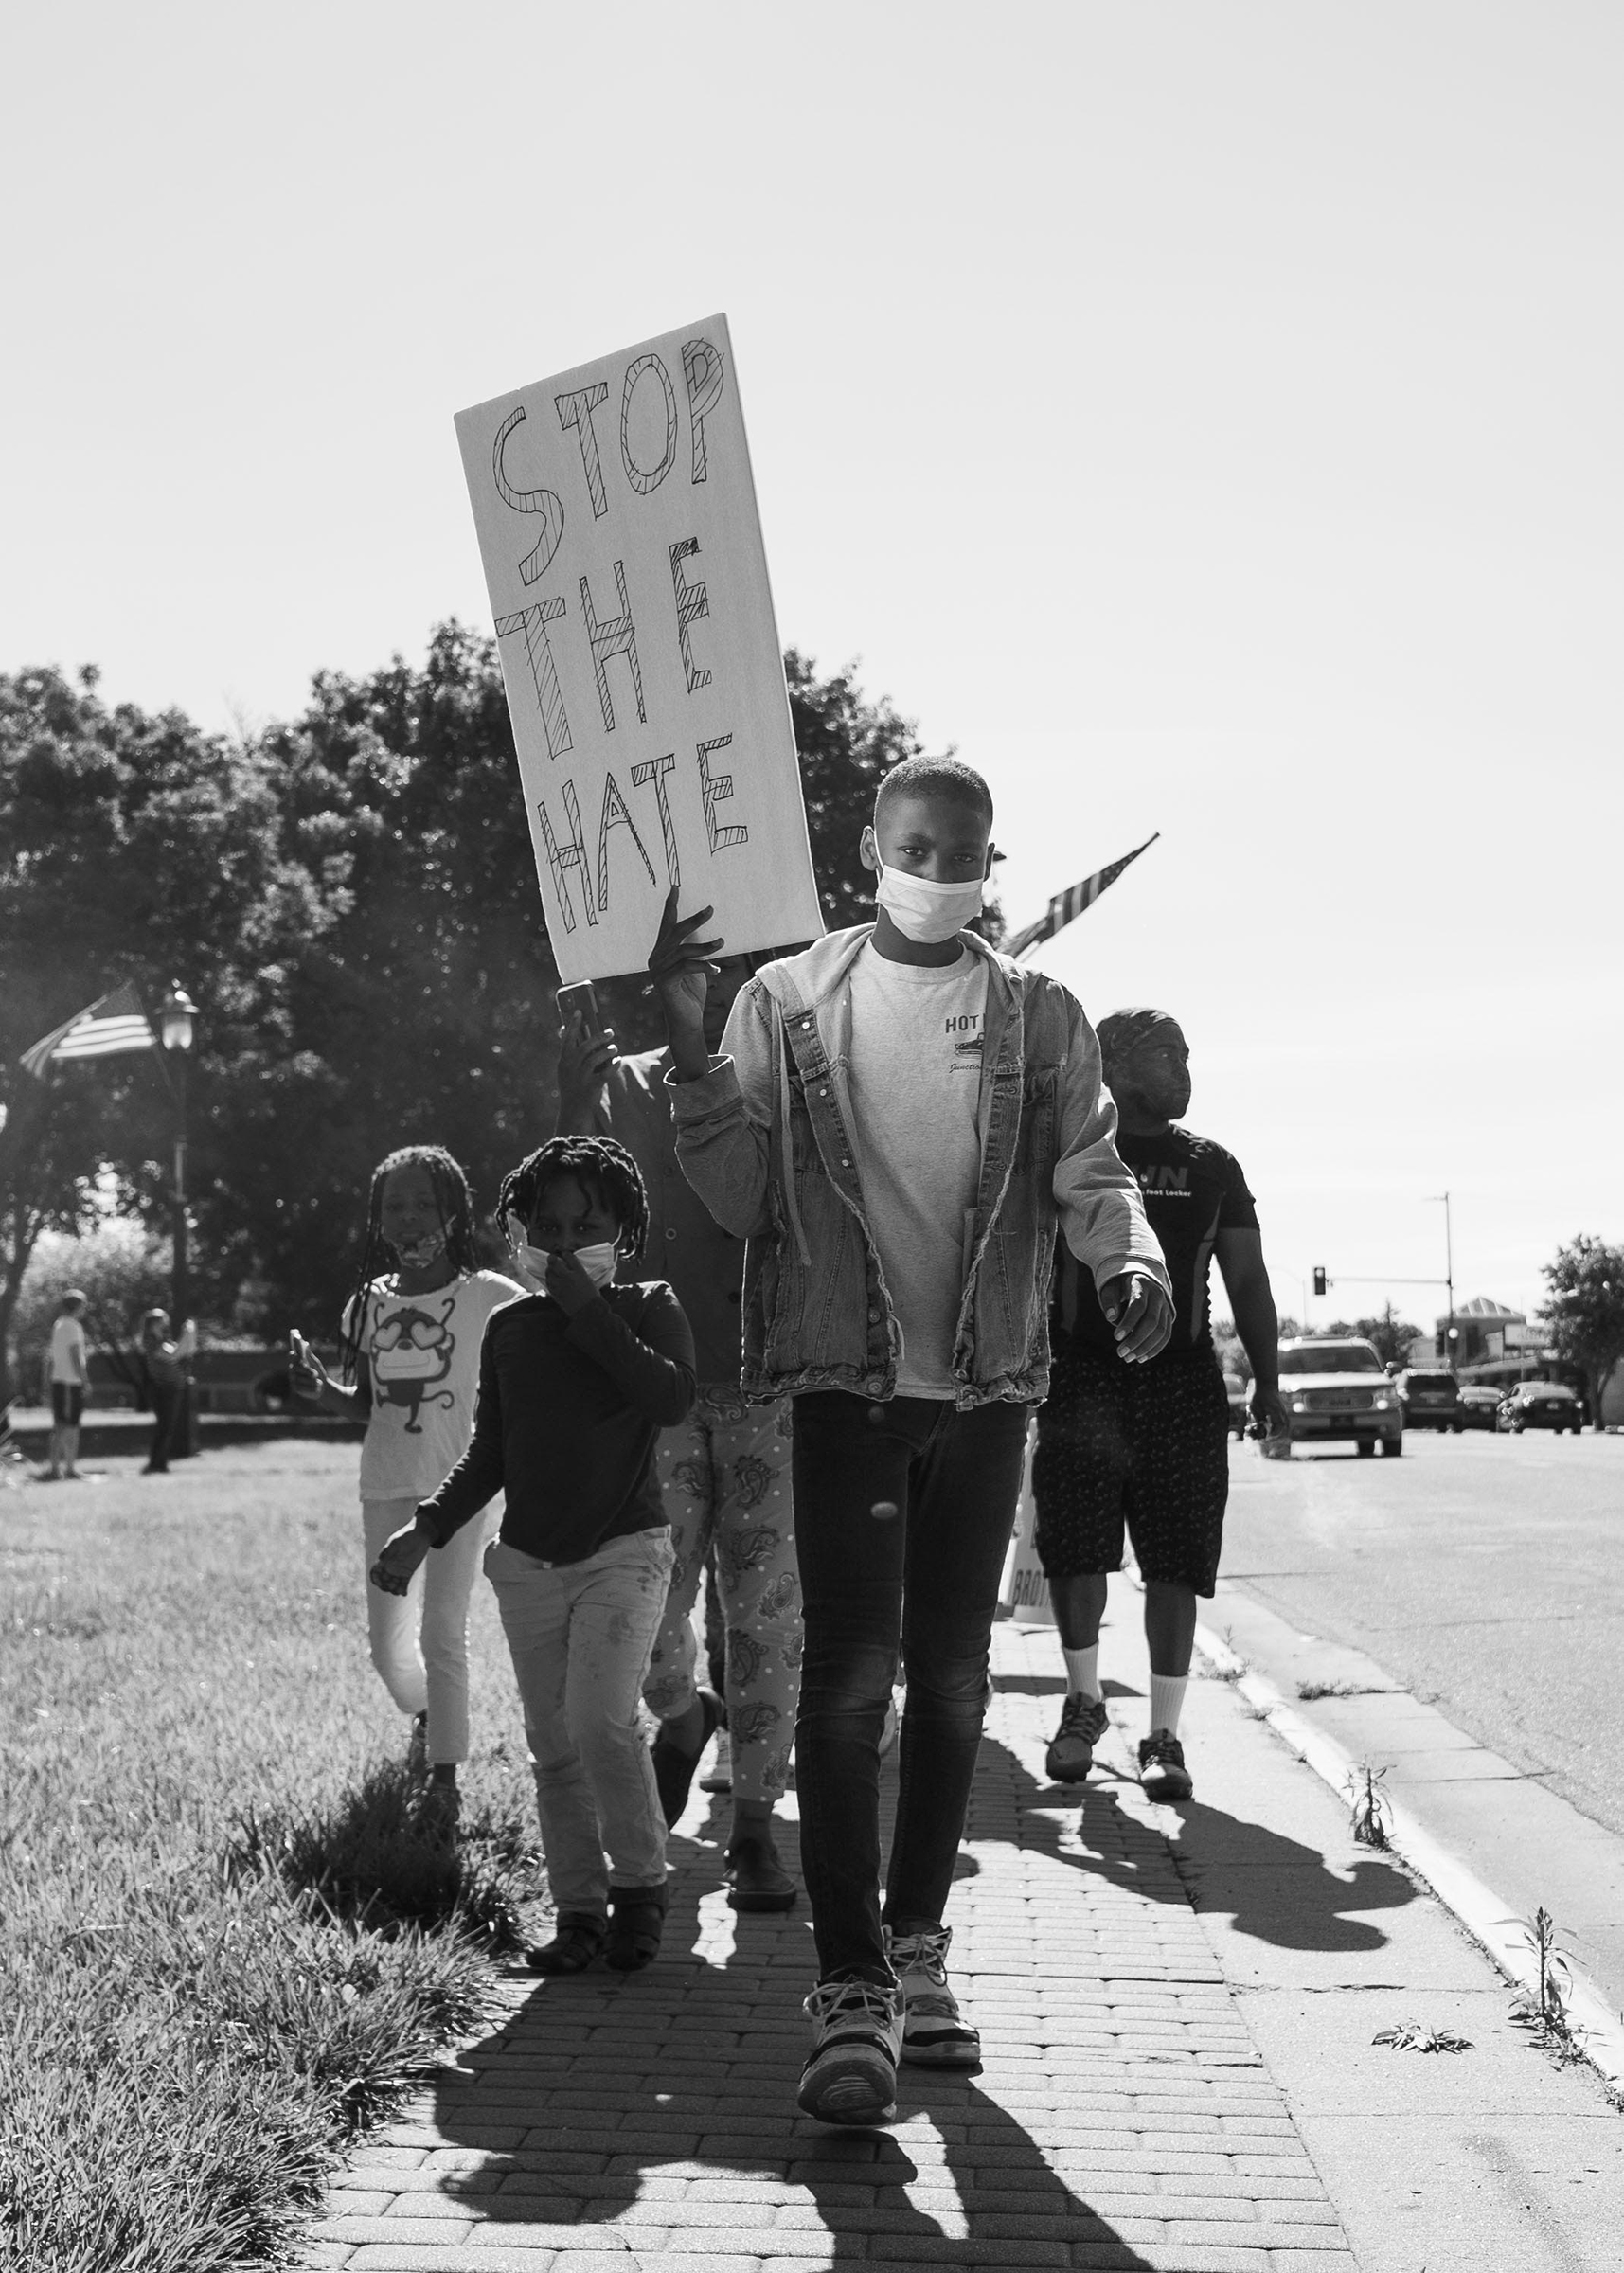 Jason Allende, 13, walks before his mother and siblings, protesting the death of George Floyd in Junction City, Kans., May 29, 2020. (Doug Barrett)